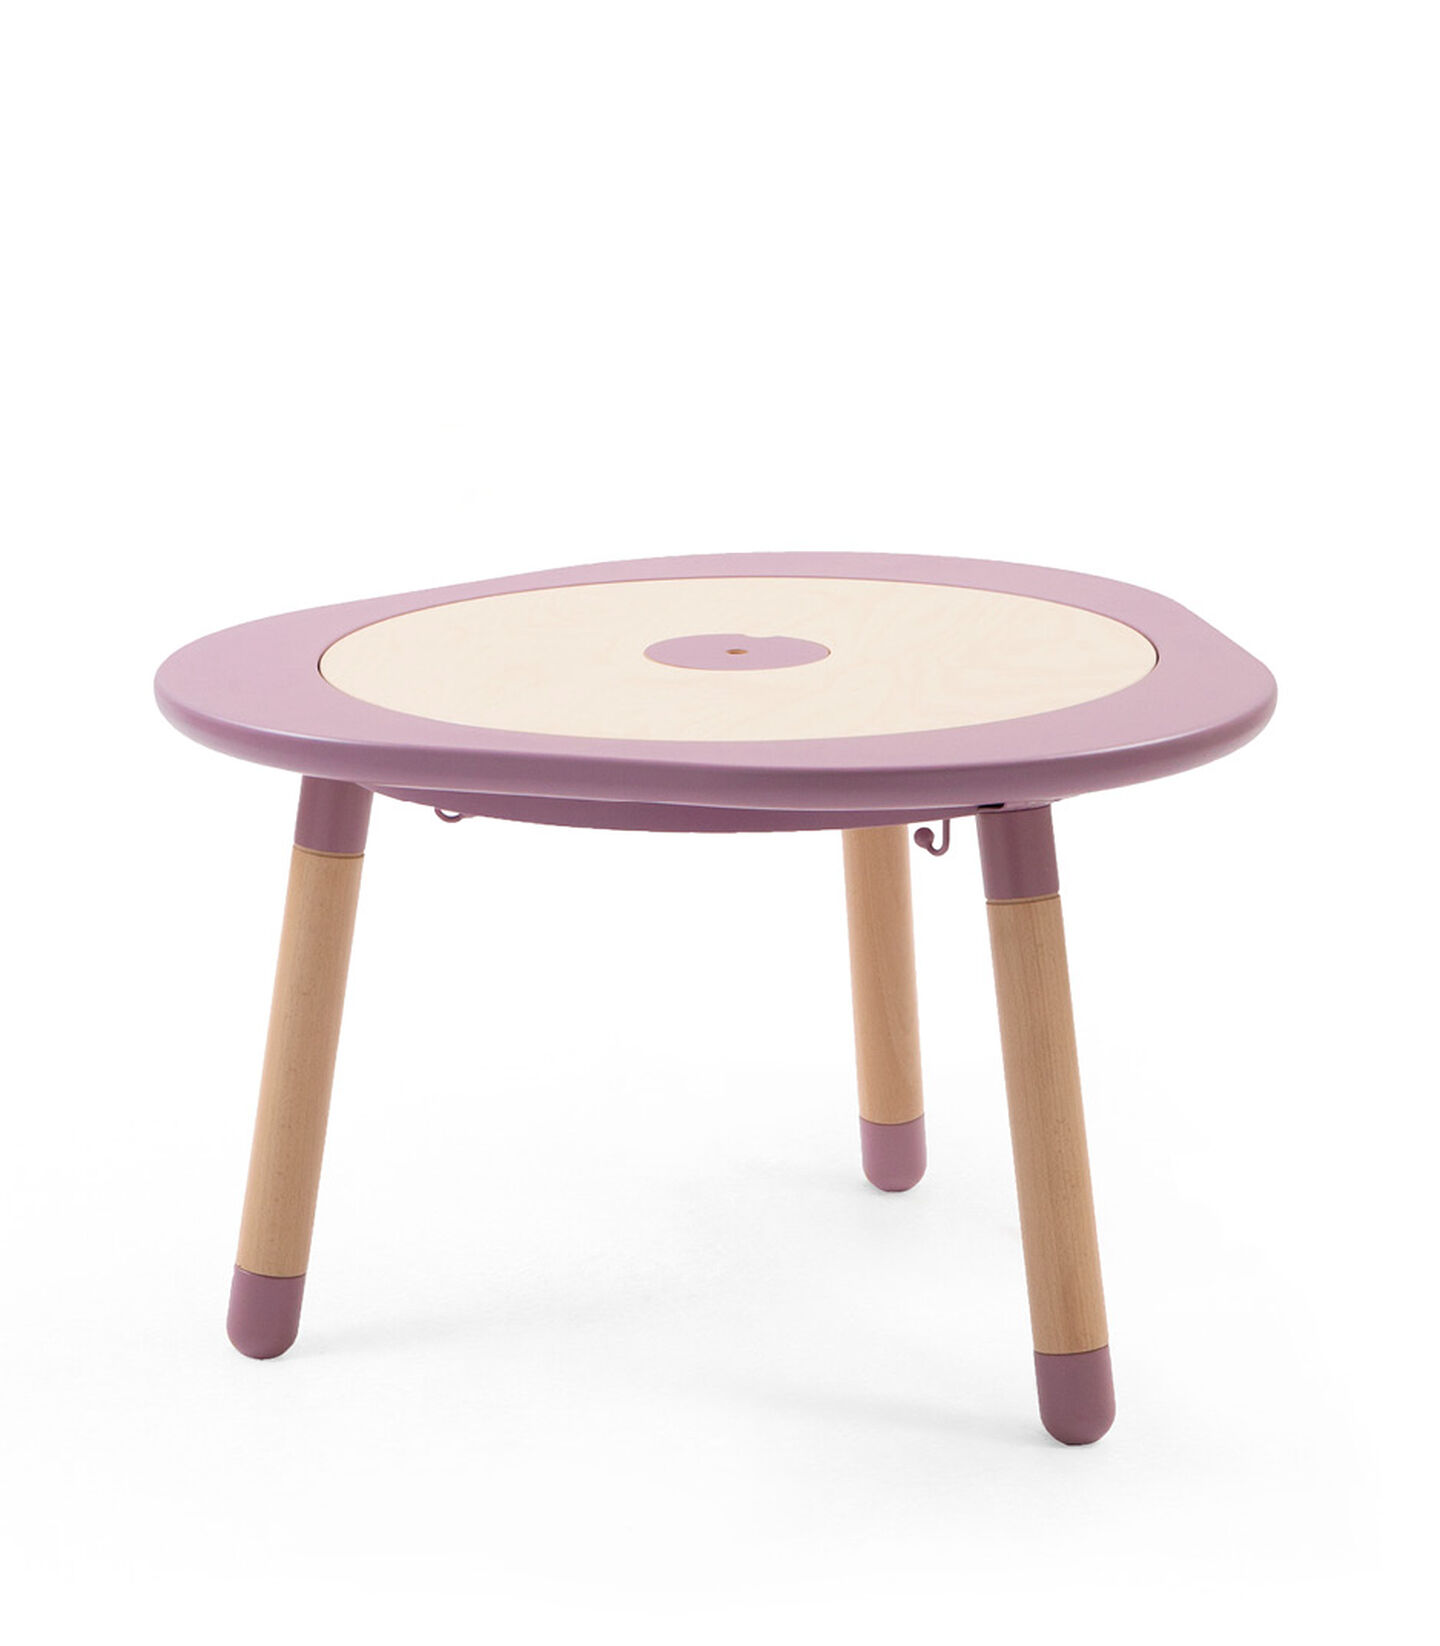 Stokke® MuTable™ in Mauve, Mauve, mainview view 1